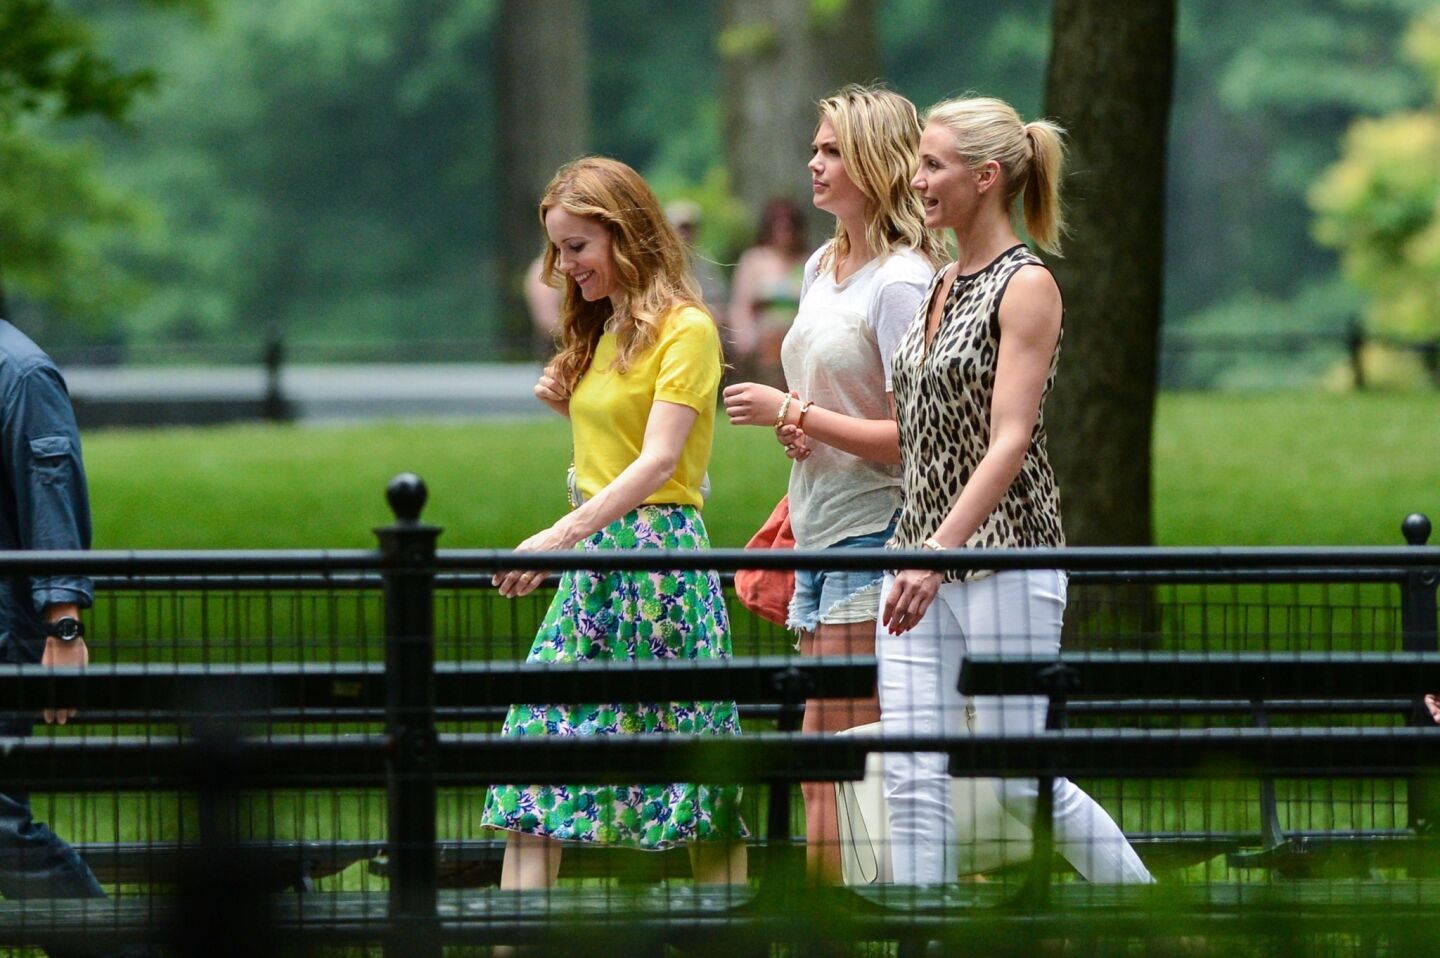 Actresses Leslie Mann, Kate Upton and Cameron Diaz film a scene for "The Other Woman" in Central Park on June 27, 2013.